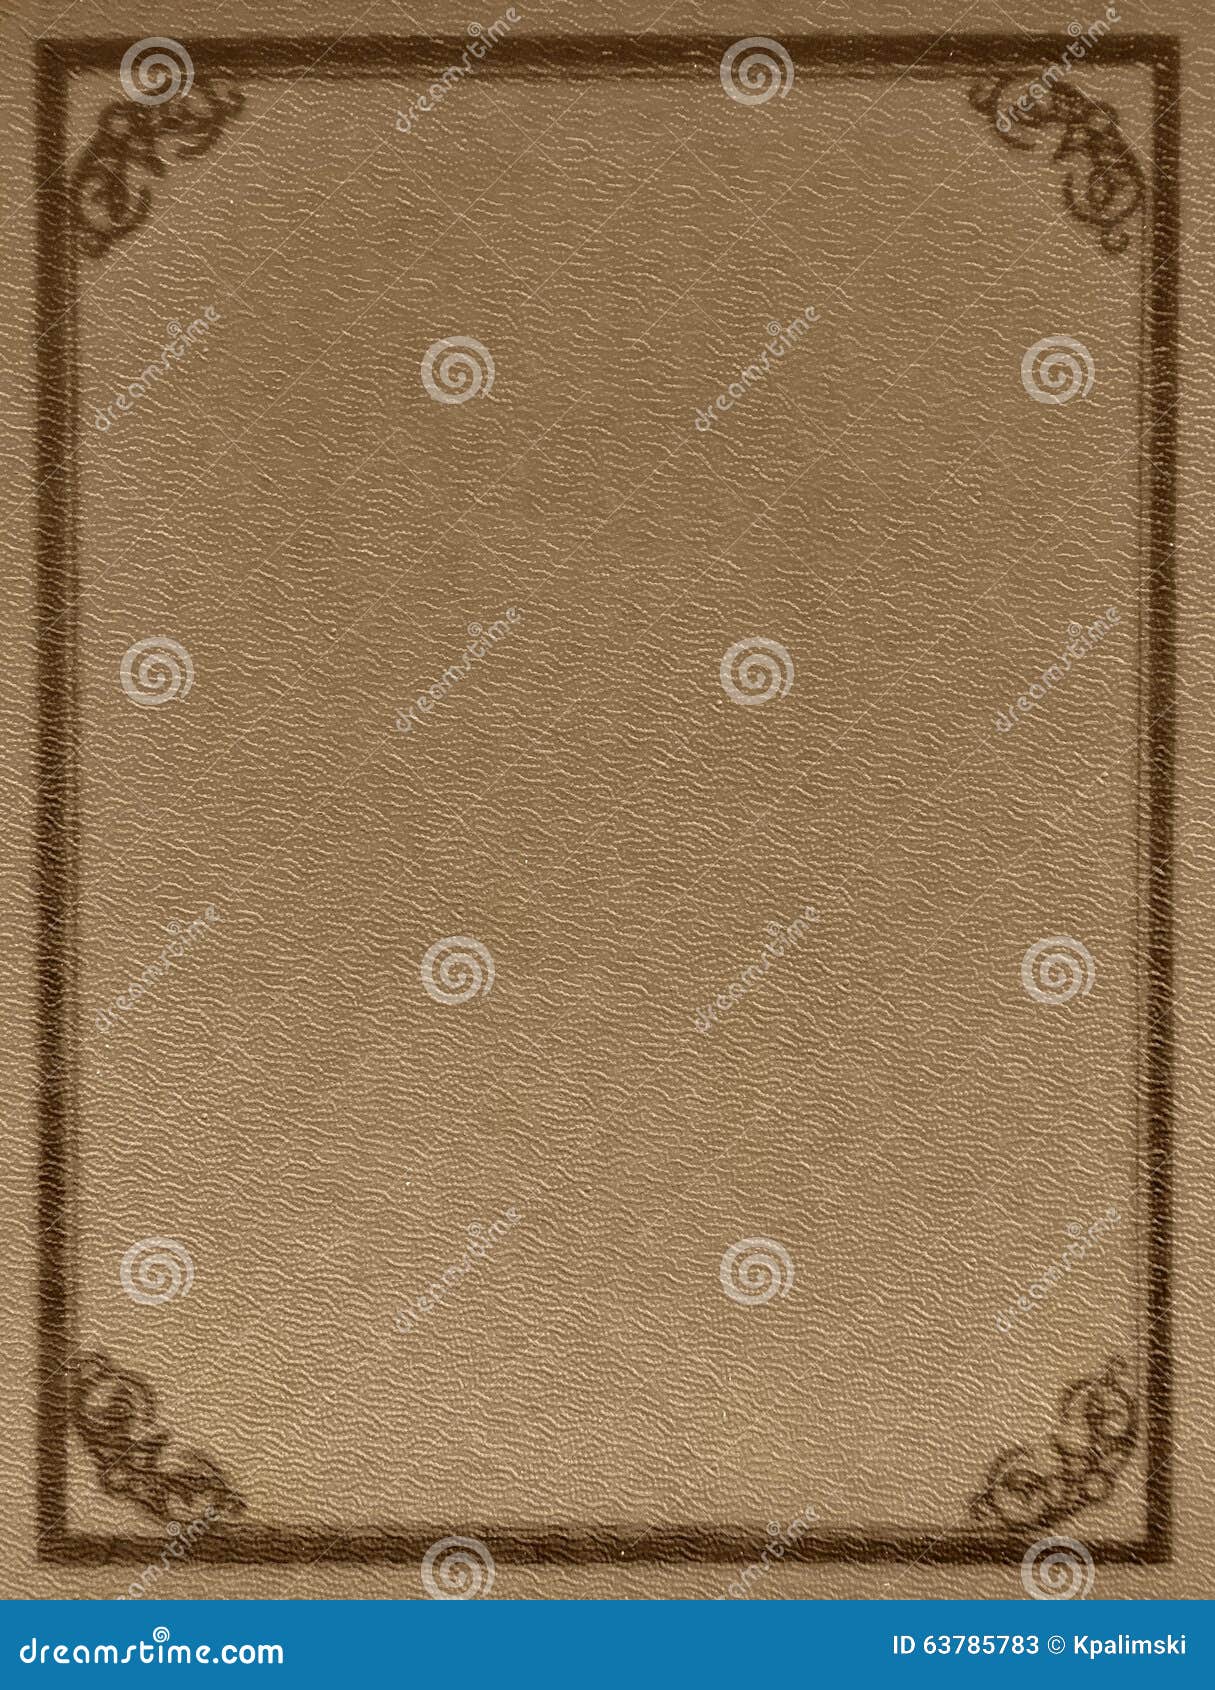 Very old empty book cover stock image. Image of design - 63785783